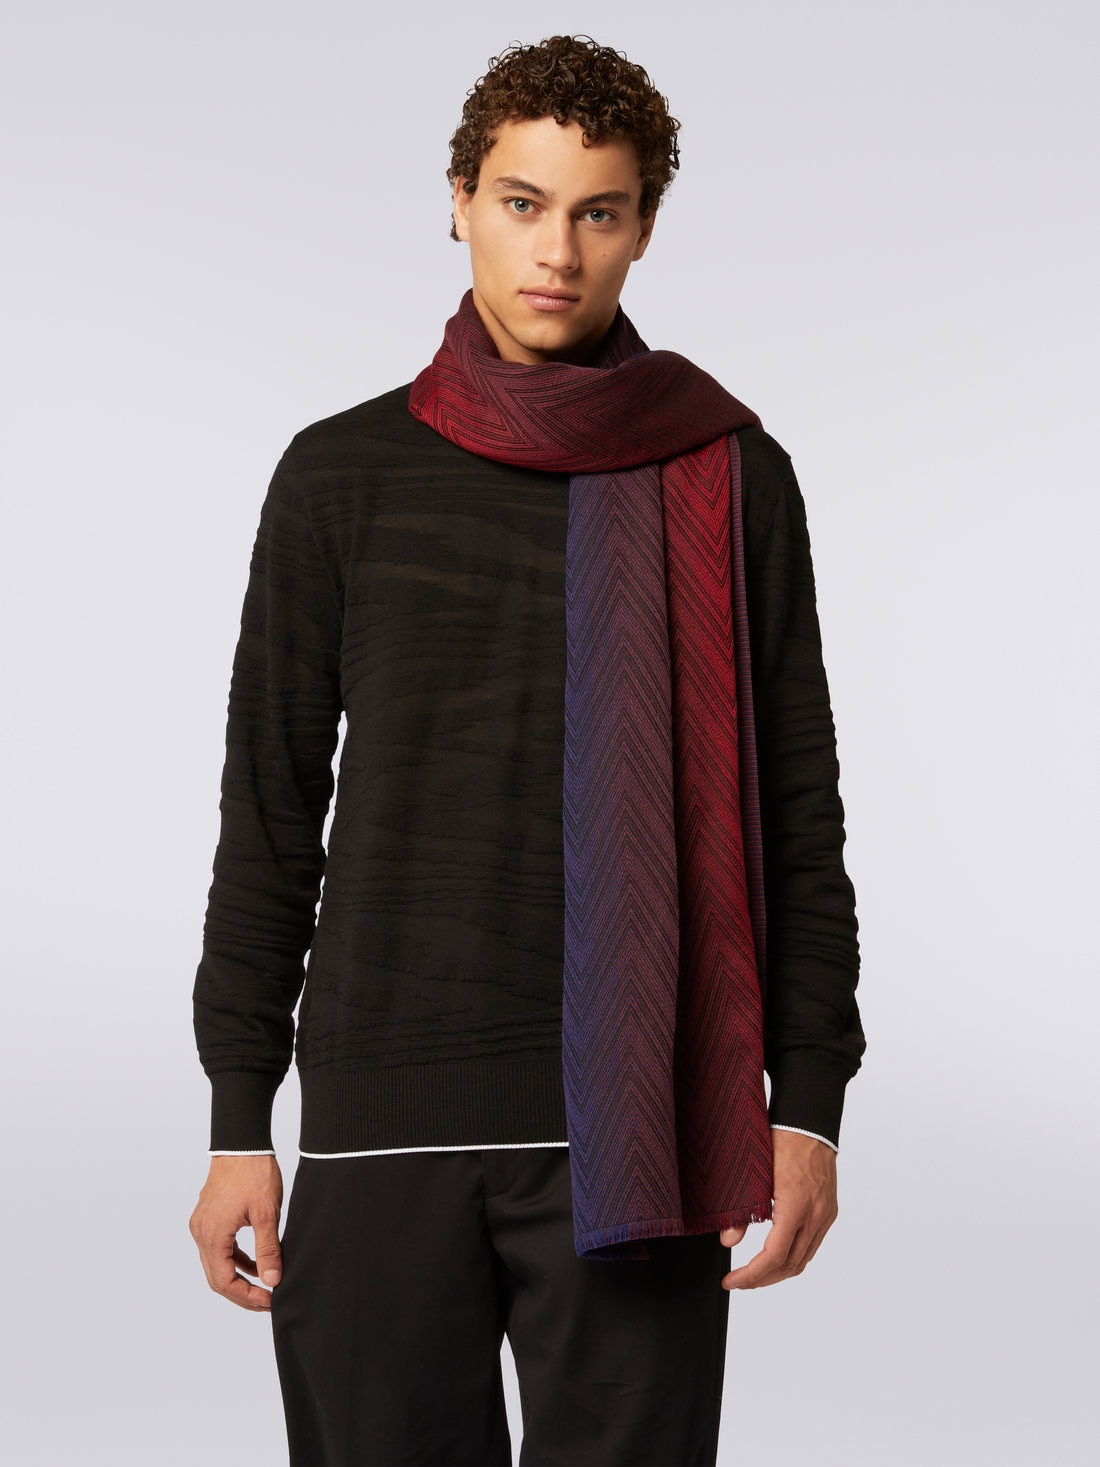 Viscose and wool chevron knit stole with frayed edges, Multicoloured  - 8053147023281 - 2